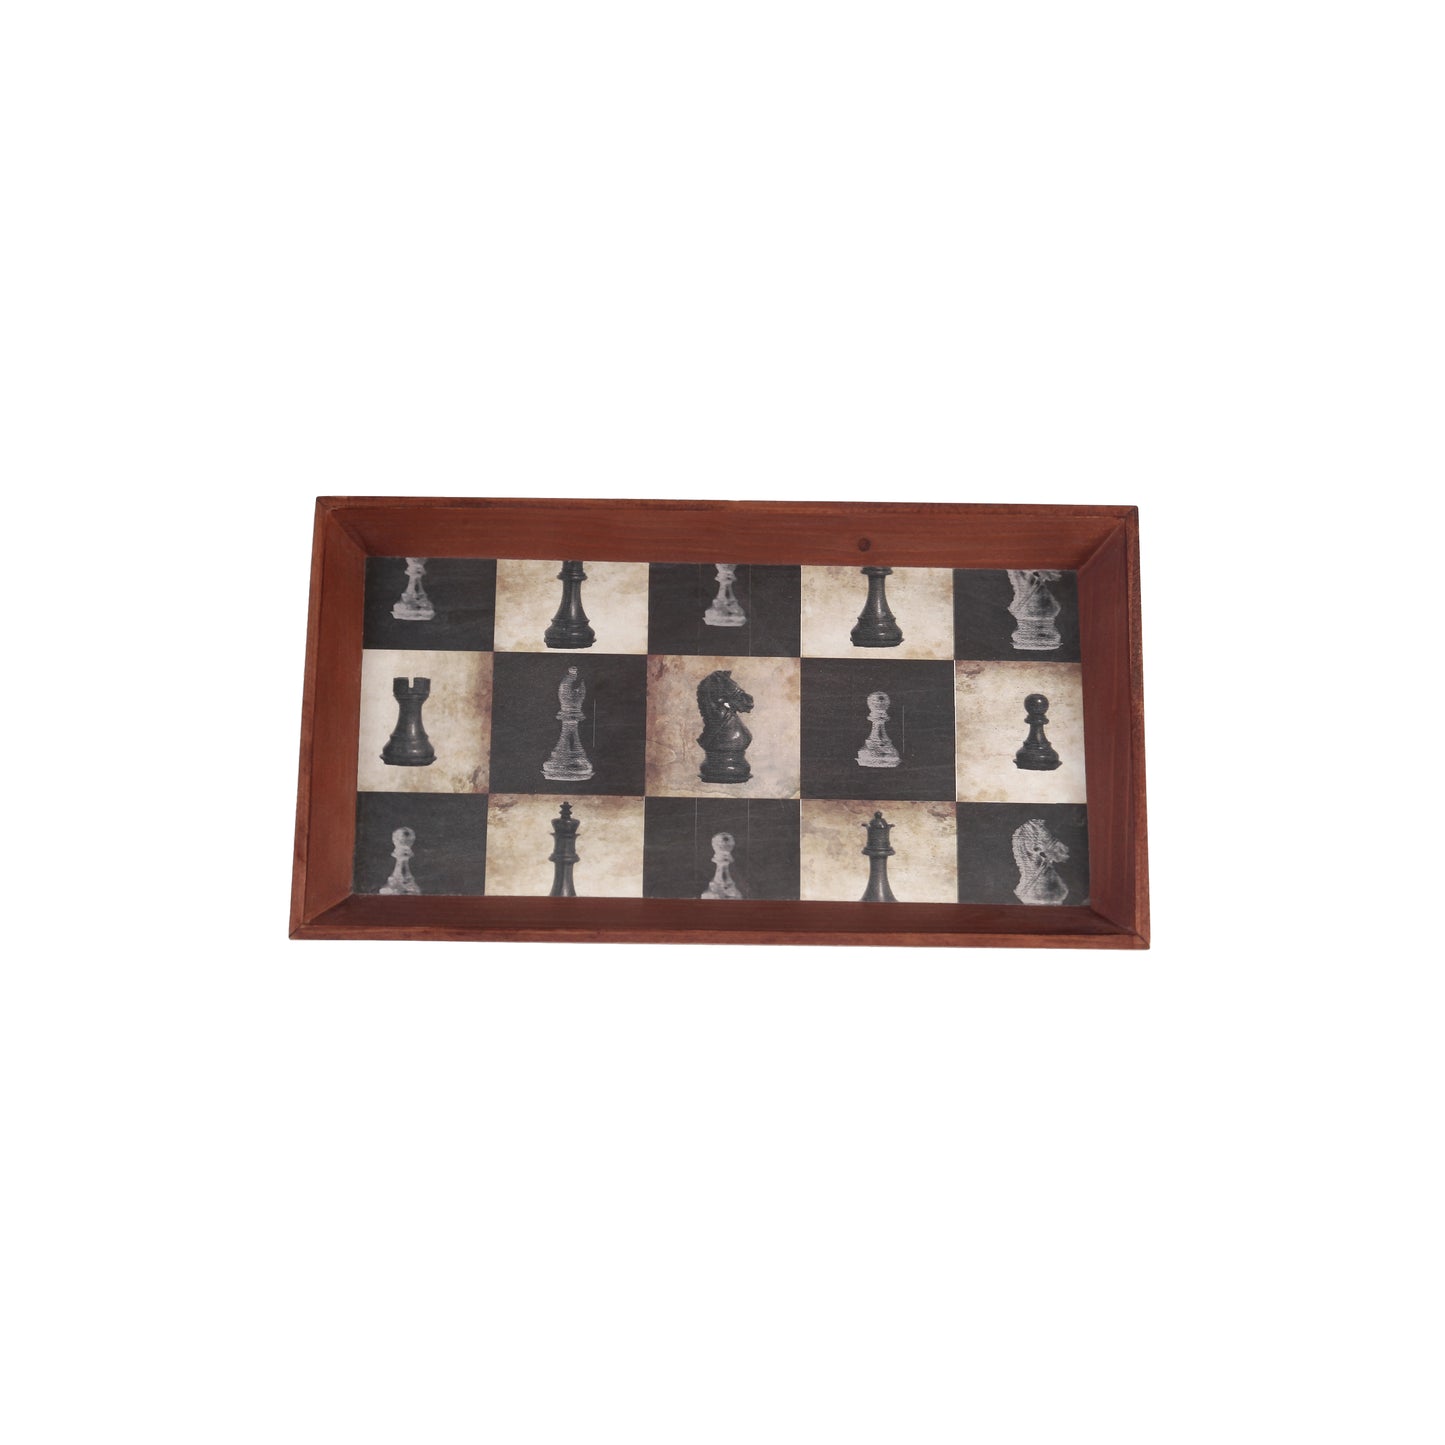 A Tiny Mistake Chess Rectangle Wooden Serving Tray, 35 x 20 x 2 cm